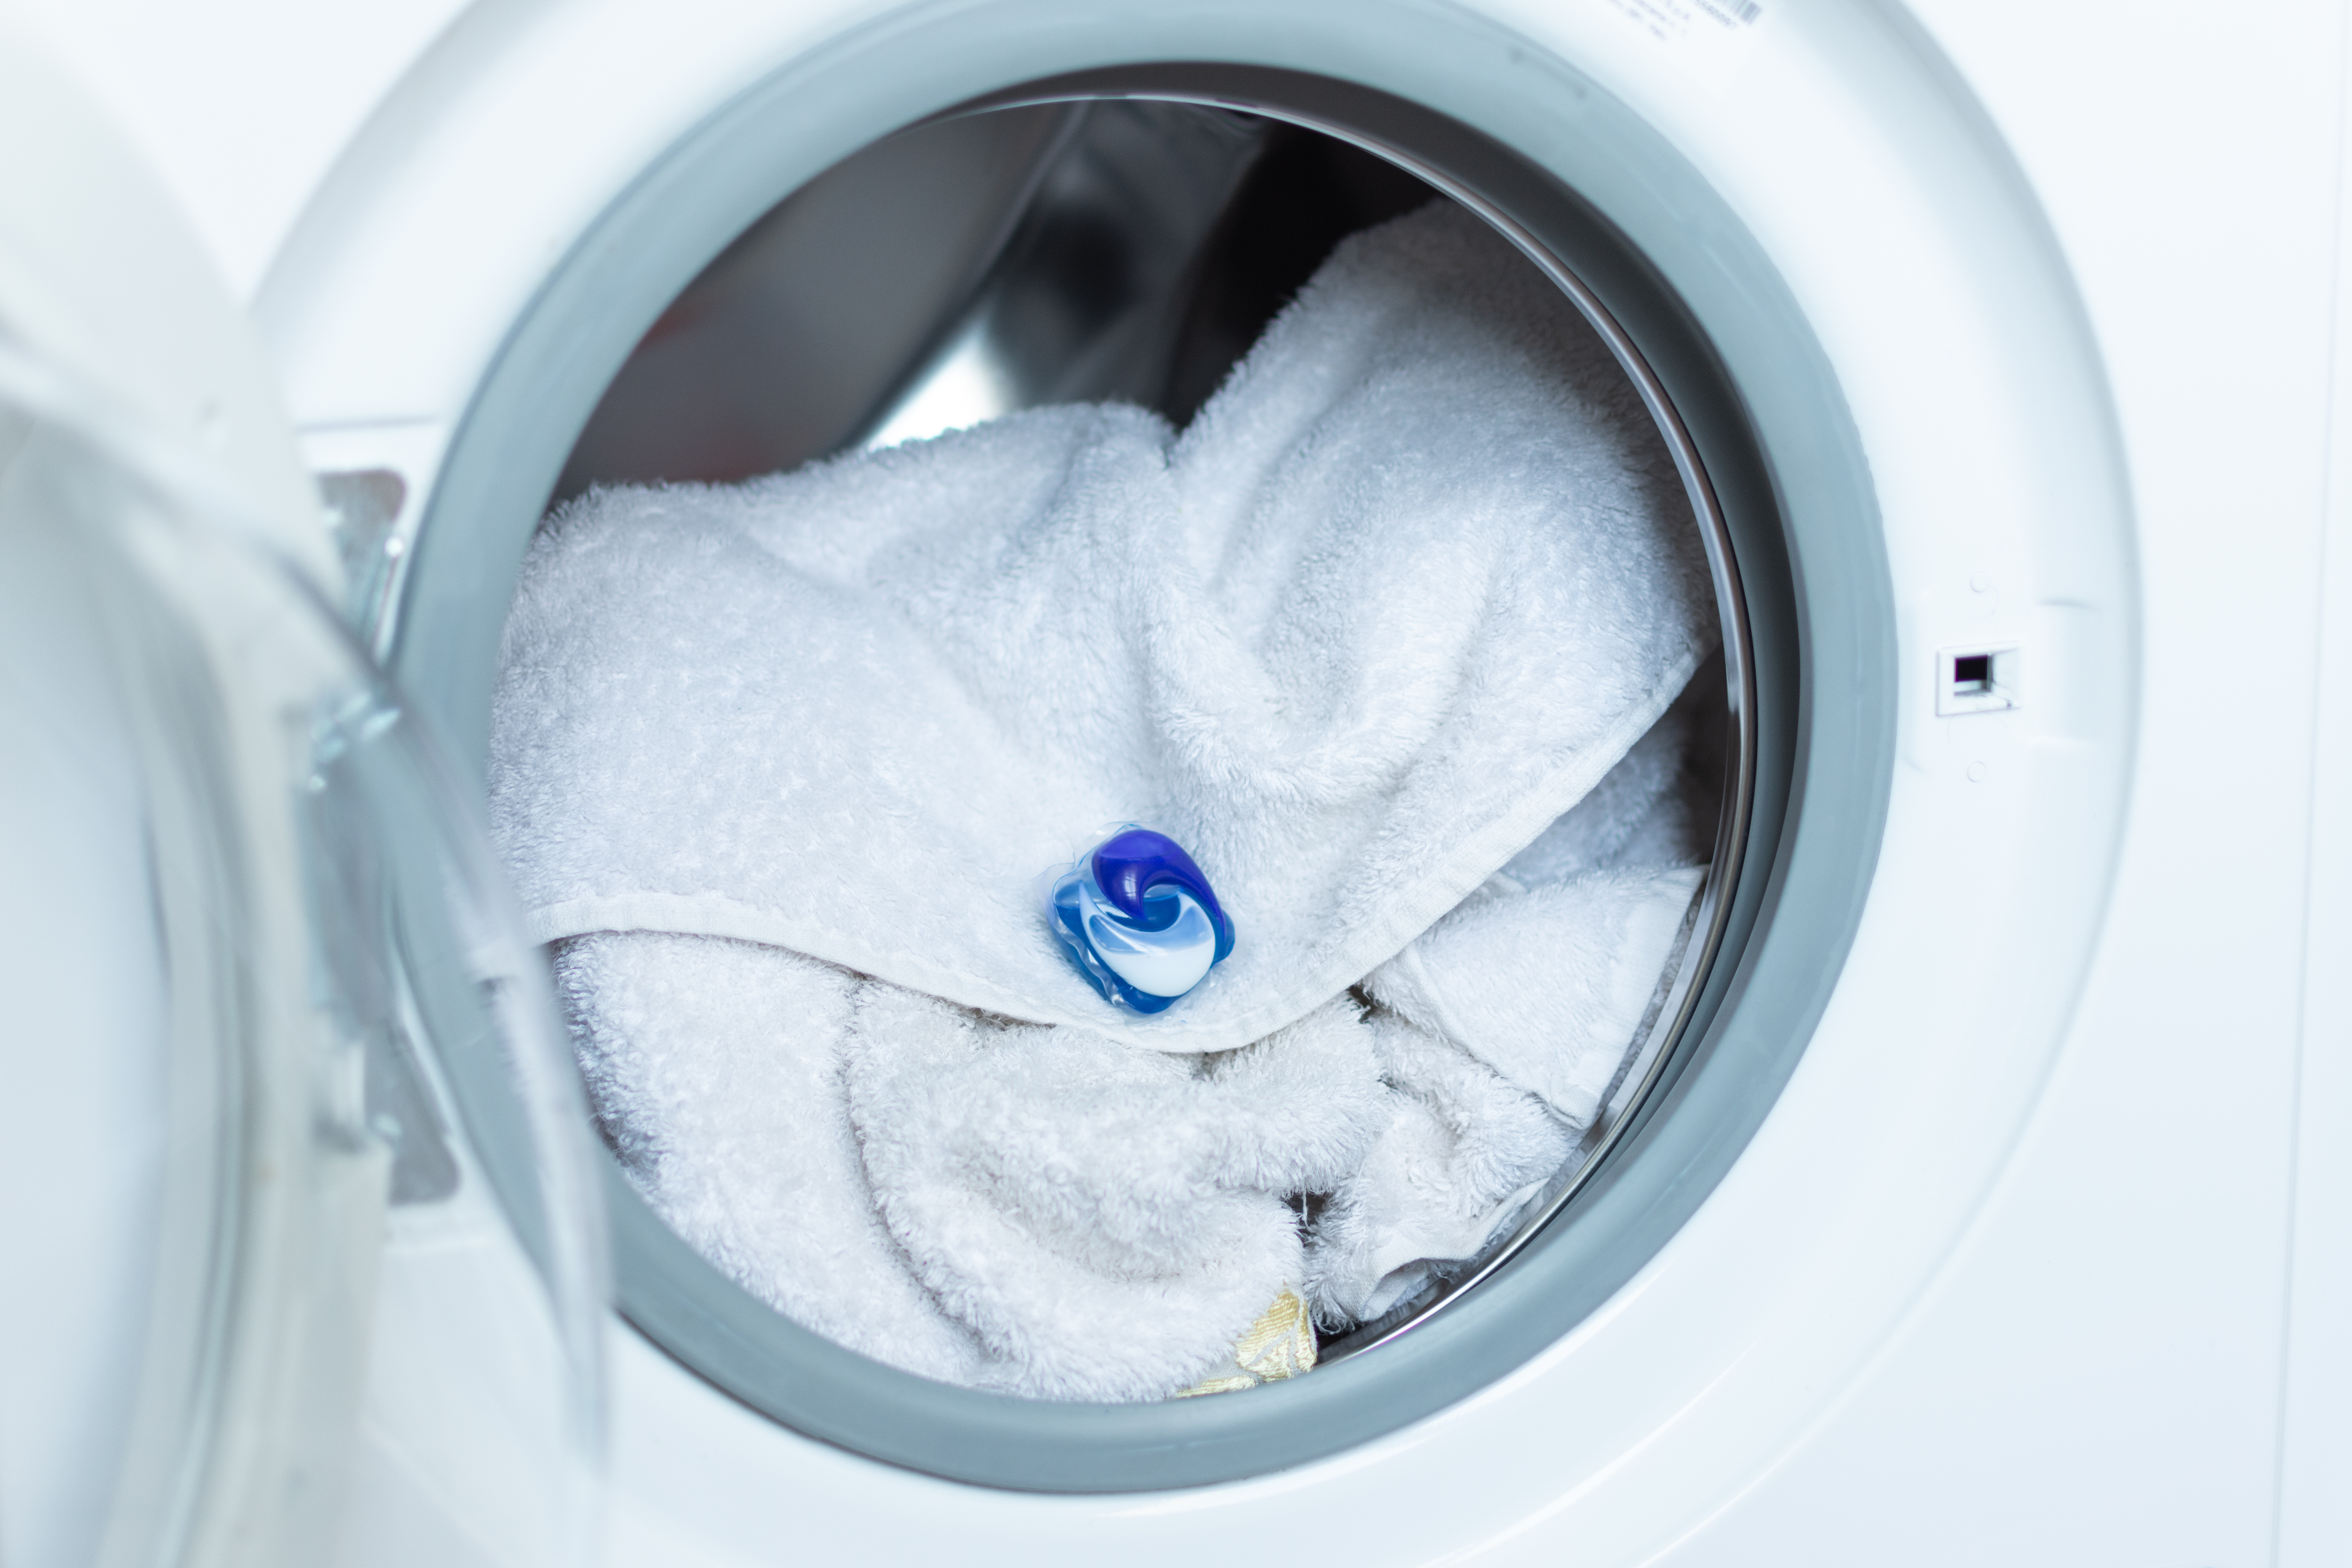 Laundry tablet in washing machine on top of white towels